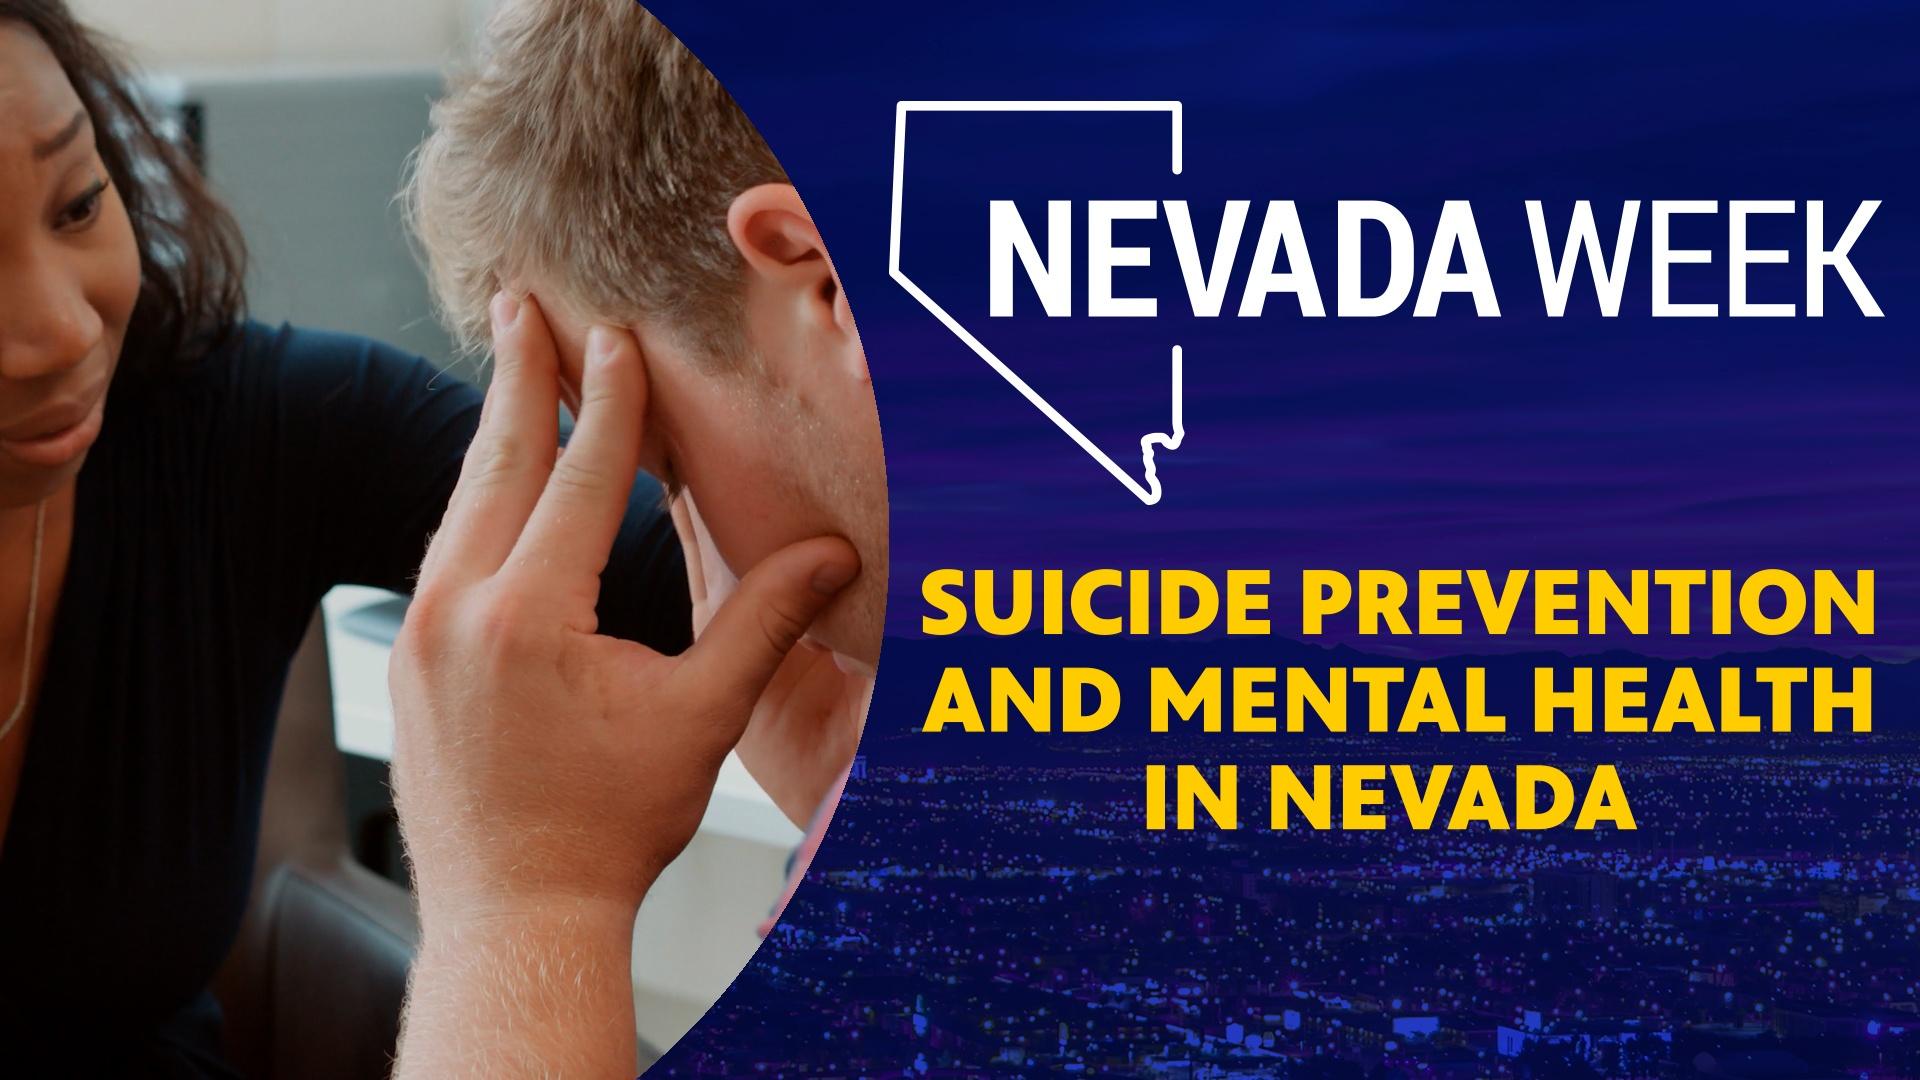 Suicide Prevention and Mental Health in Nevada